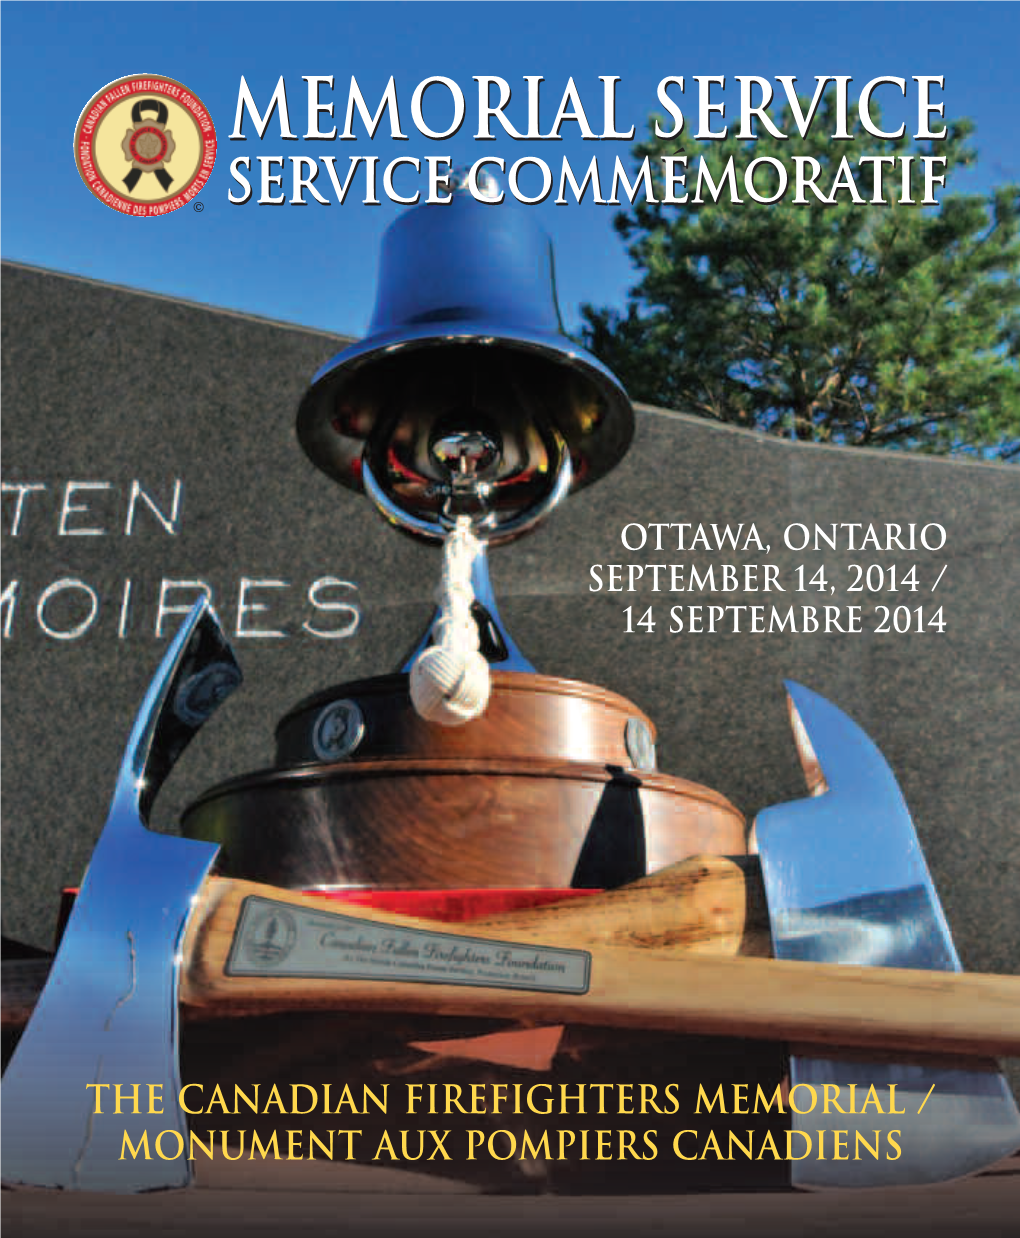 The Canadian Firefighters Memorial / Monument Aux Pompiers Canadiens